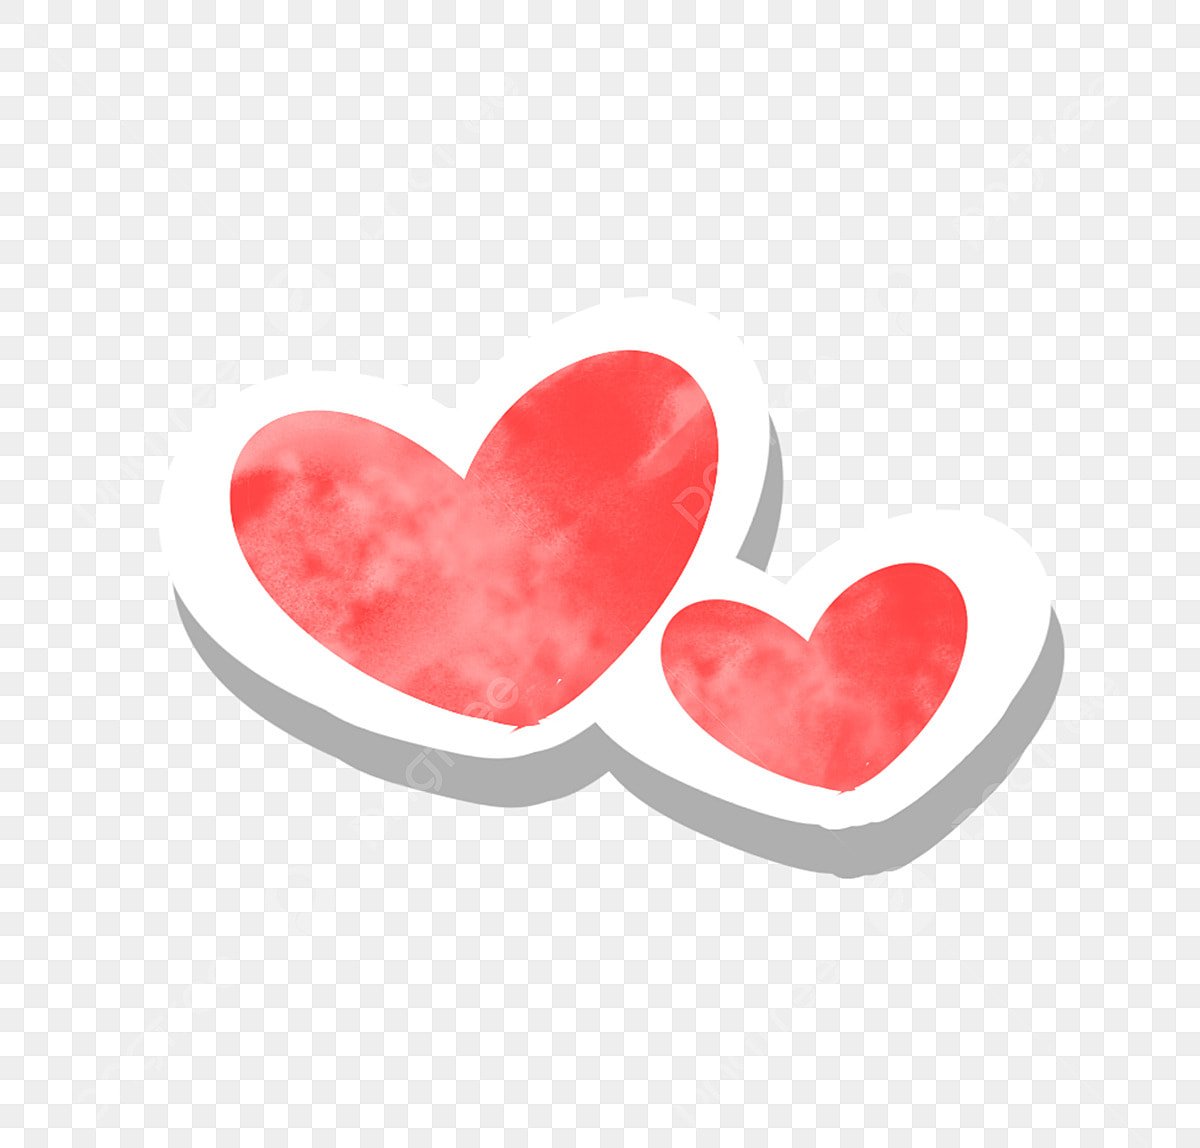 Love Stickers PNG Transparent Image Free Download